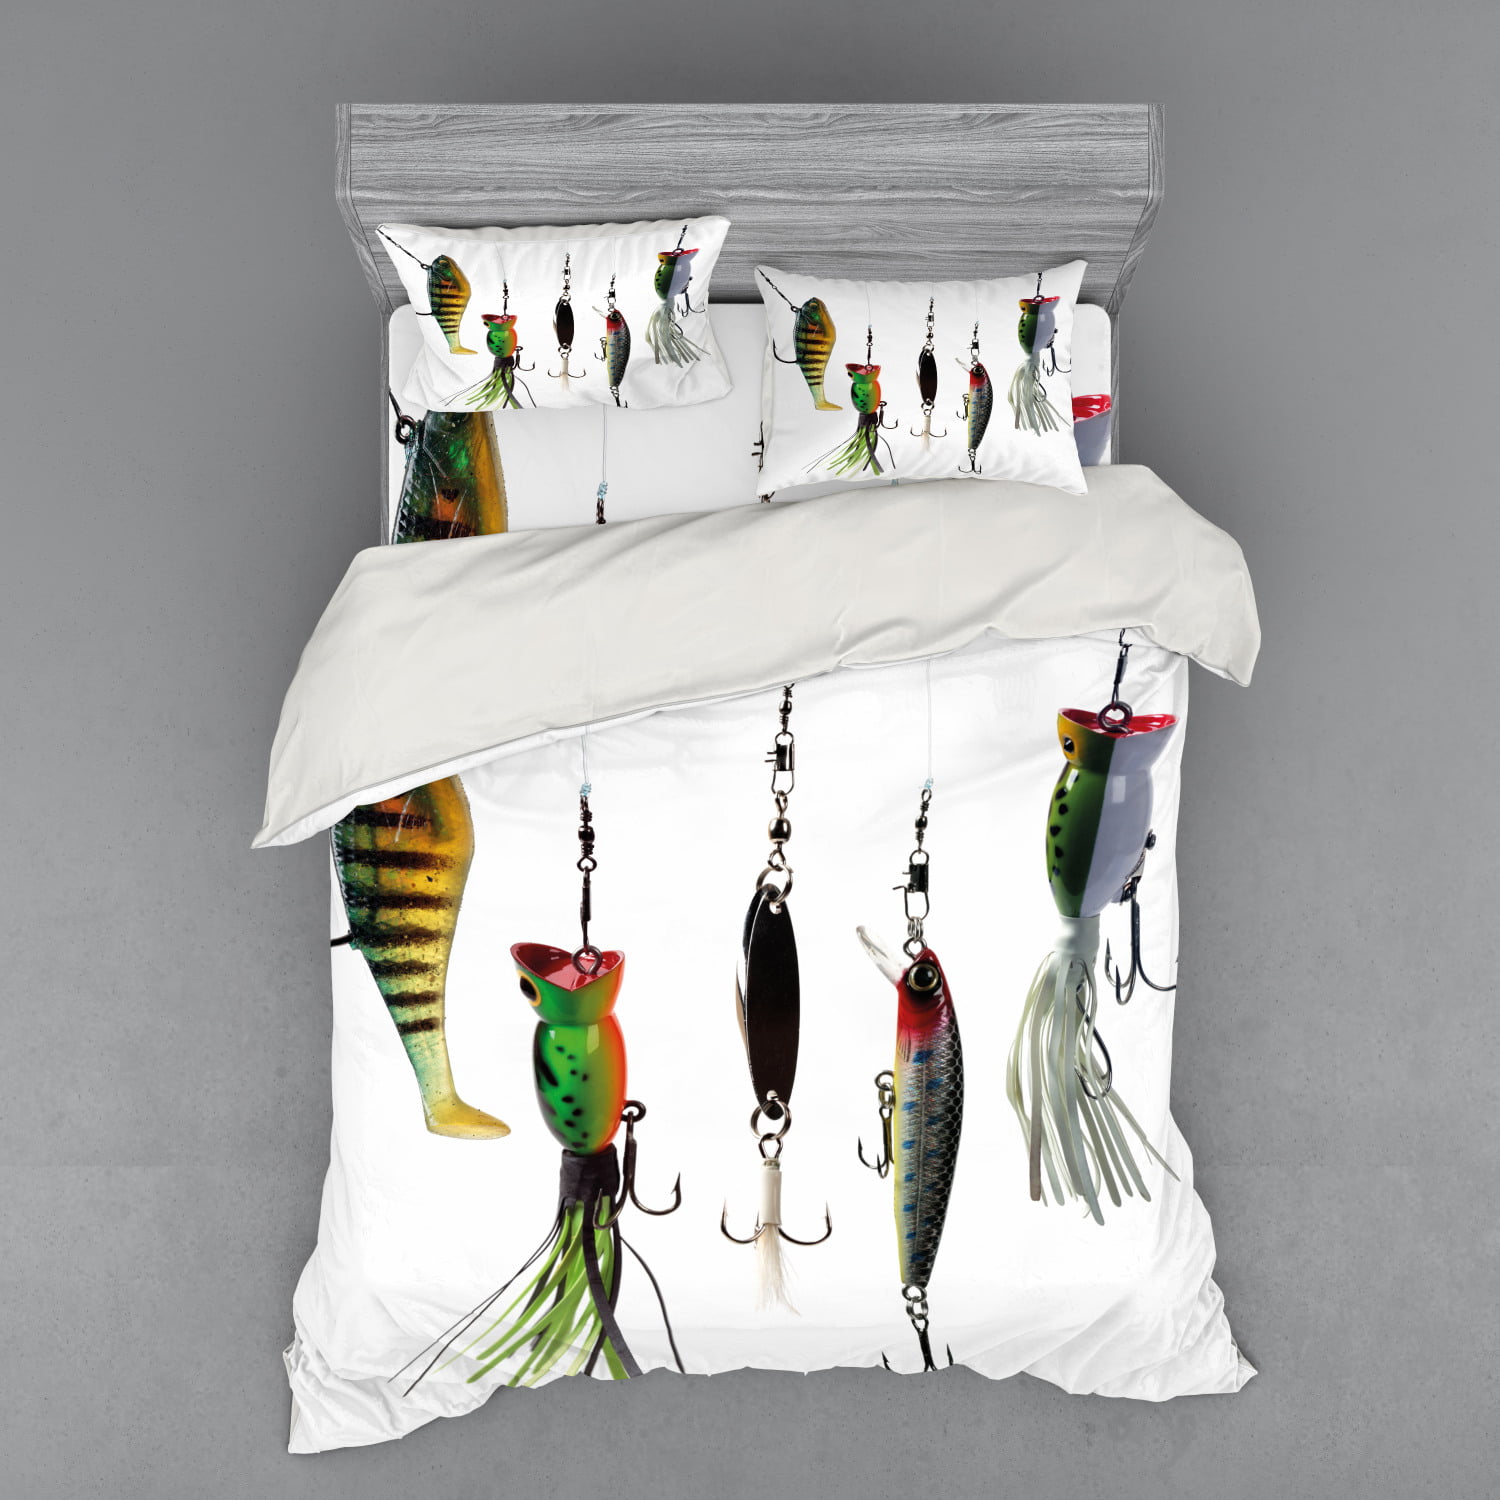 Decorative 2 Piece Bedding Set with 1 Pillow Sham Various Type of Fishing Baits Hobby Leisure Passtime Sports Hooks Catch Elements Ambesonne Fishing Duvet Cover Set Twin Size White